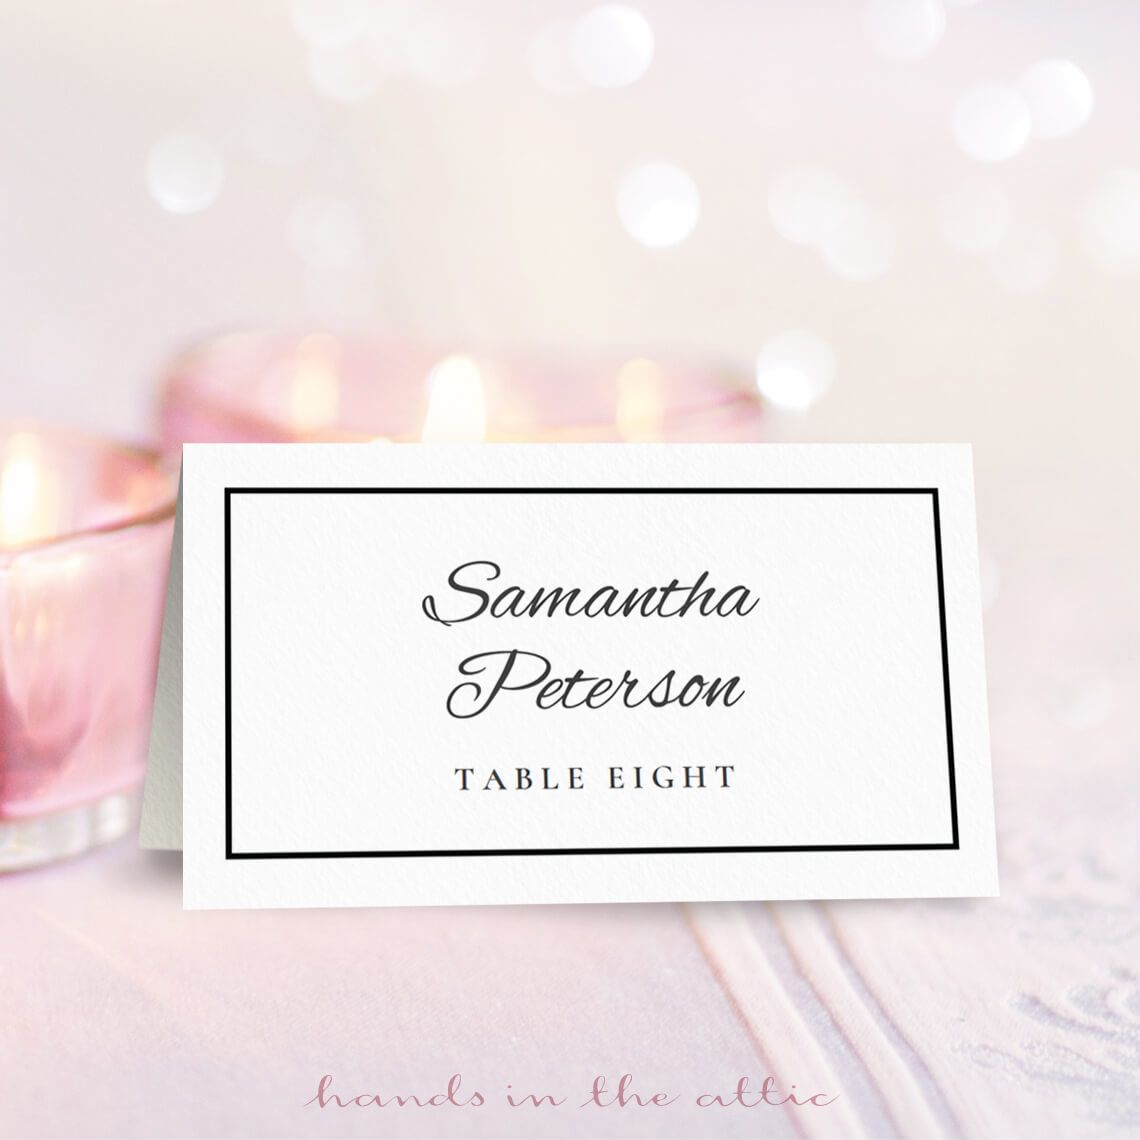 Wedding Place Card Template | Free On Handsintheattic | Place - Free Printable Place Cards Template